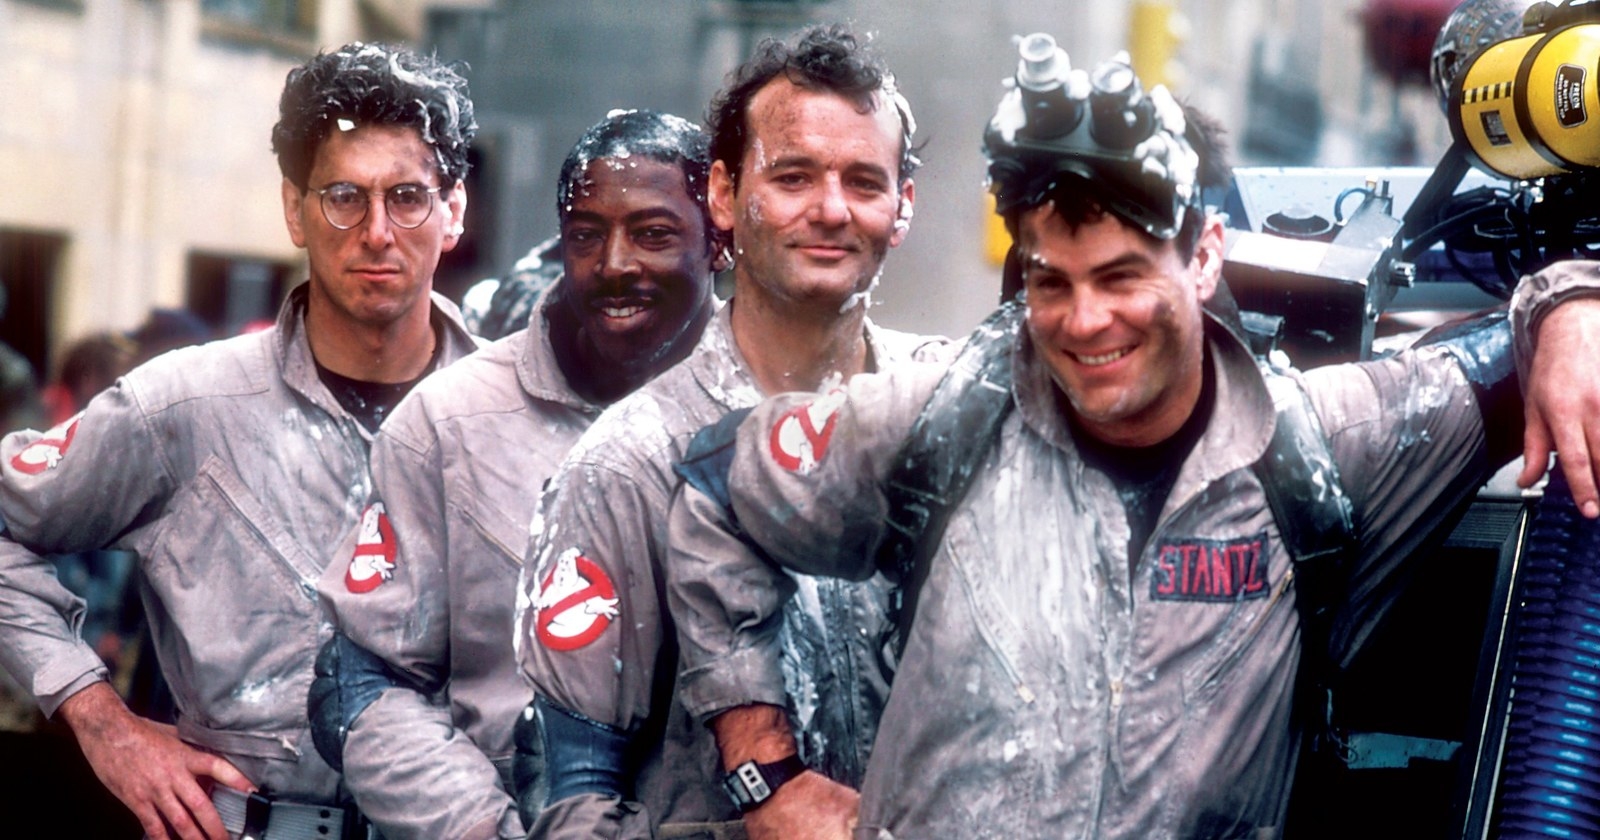 The Ghostbusters old spooky films